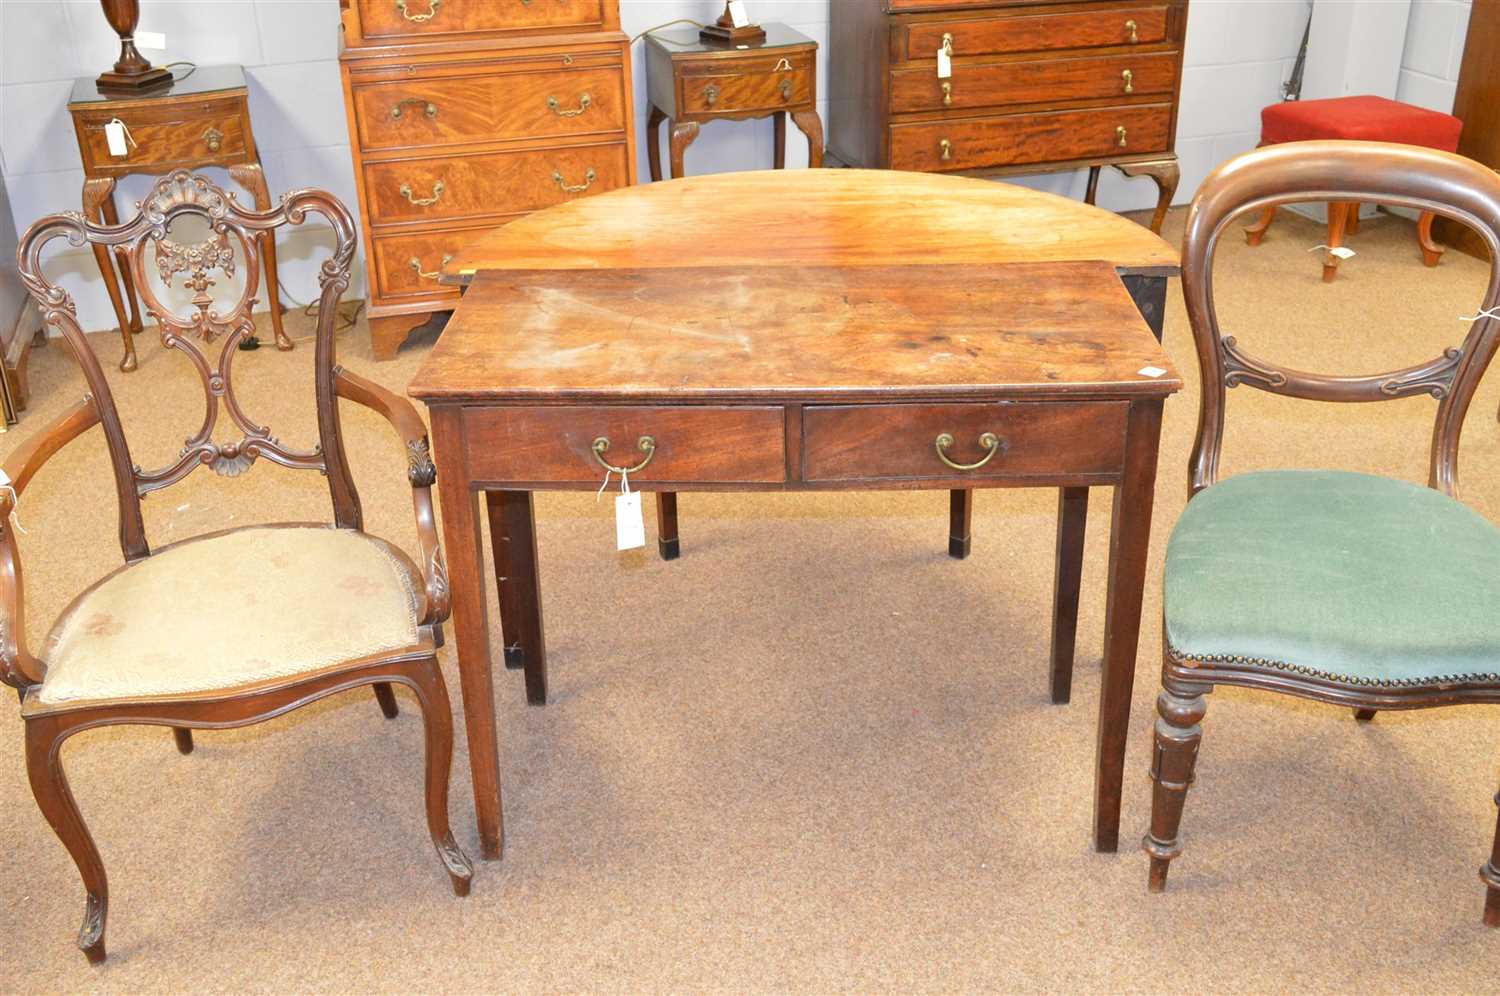 Lot 378 - Two chairs and two tables